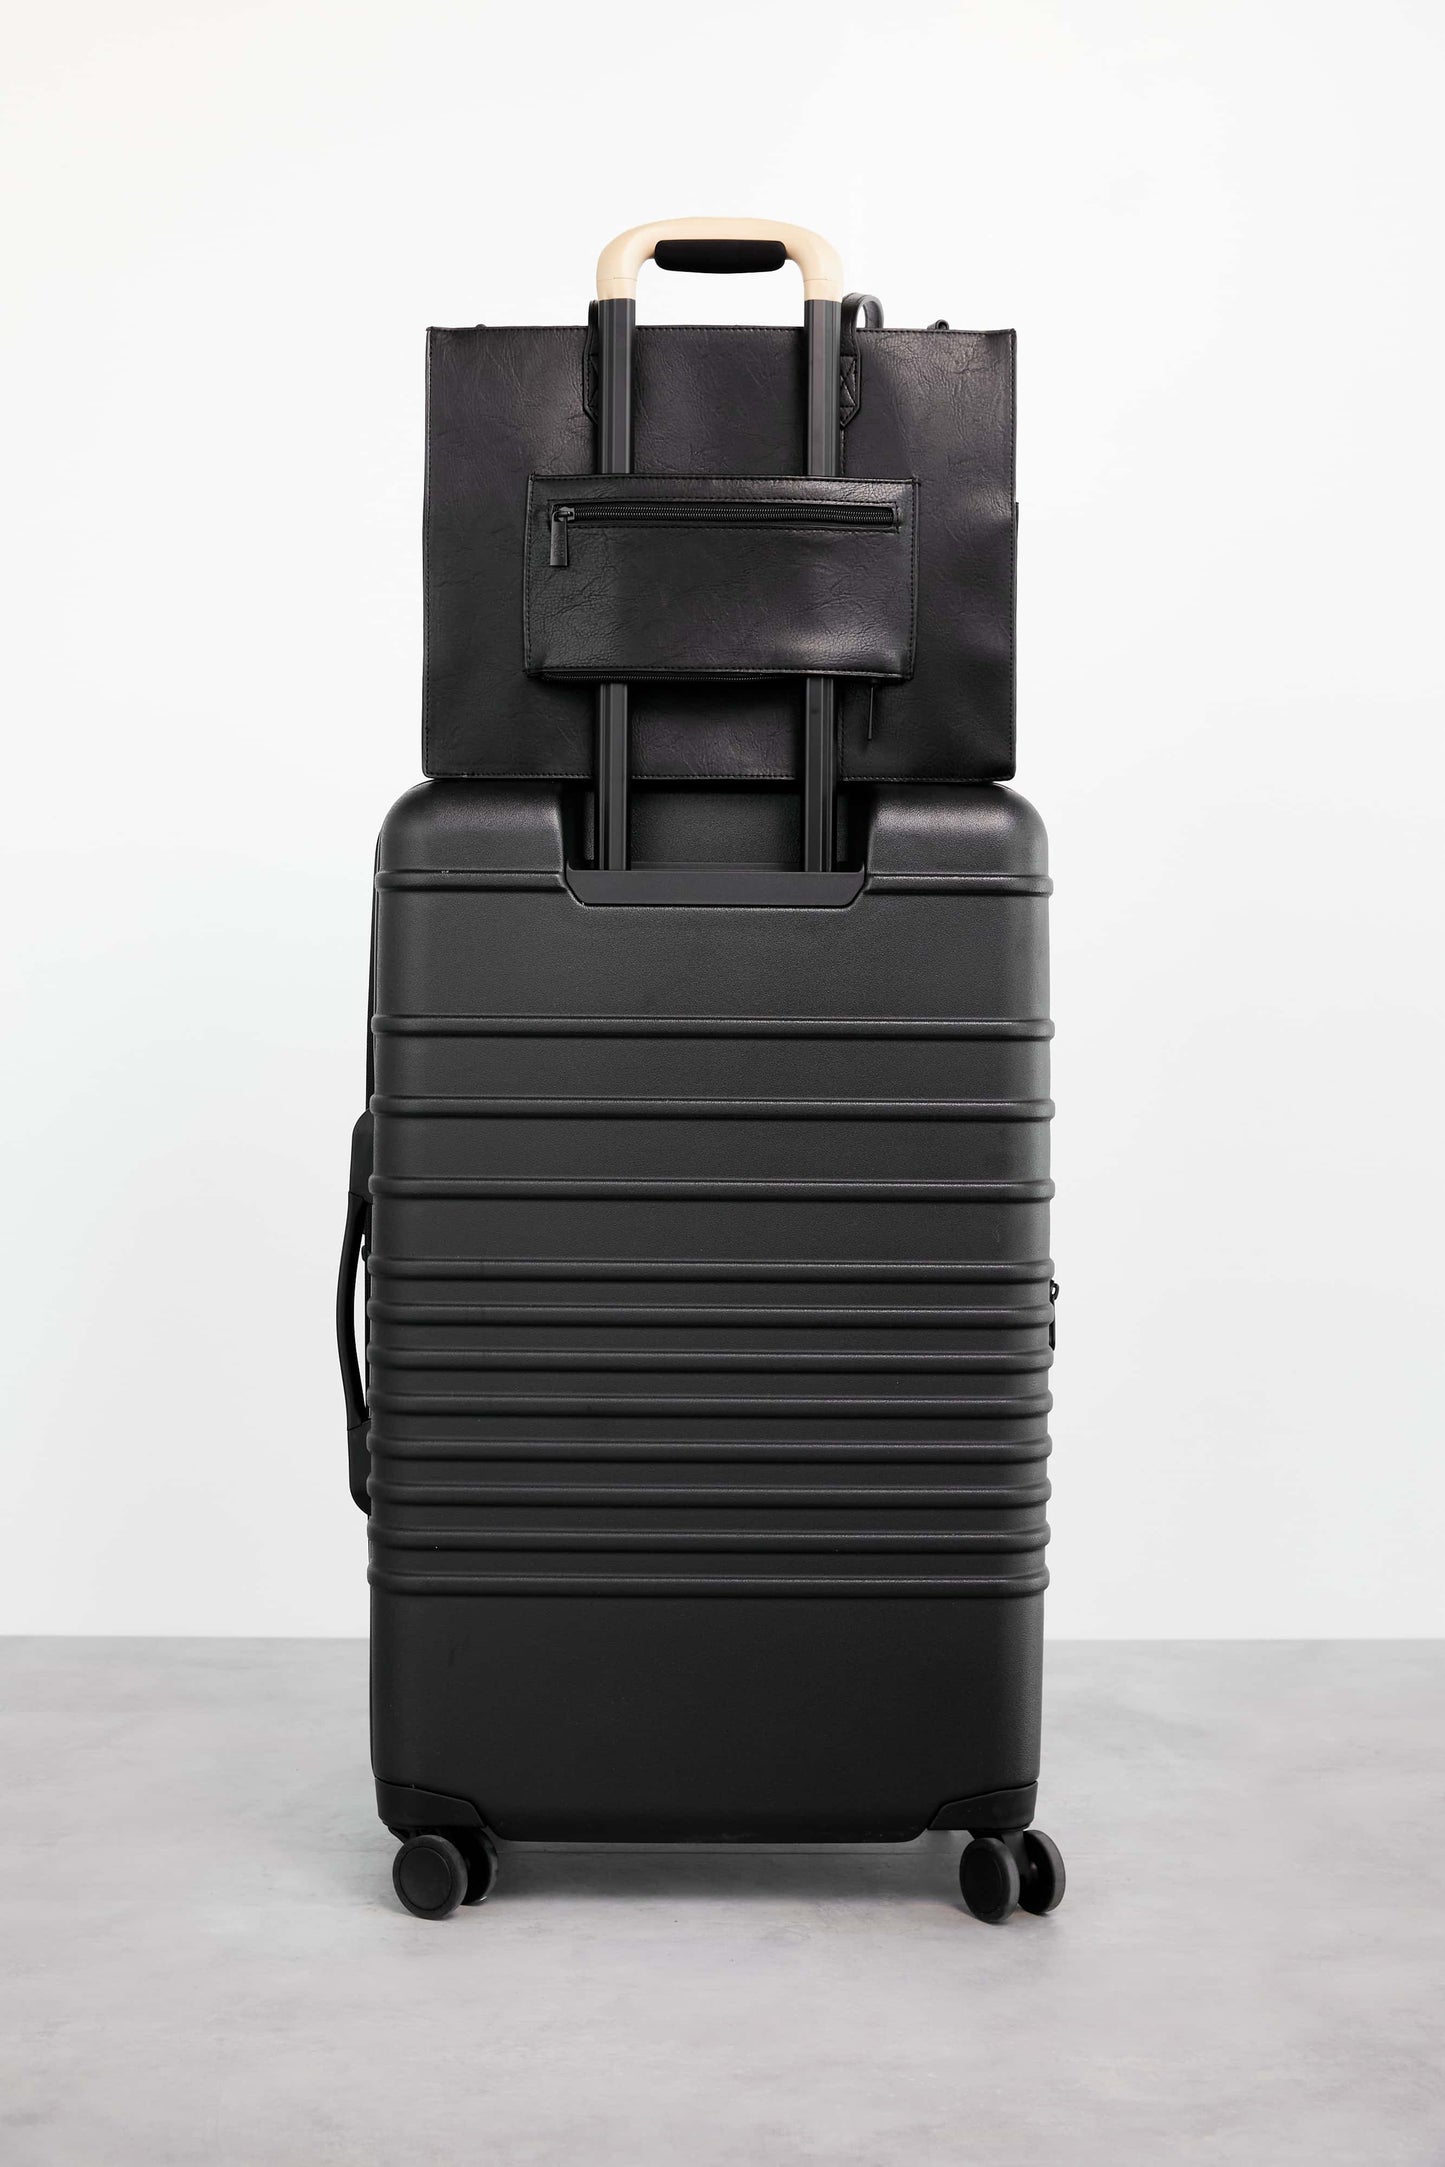 Work Tote Black Back Trolley Sleeve Stacked on Suitcase